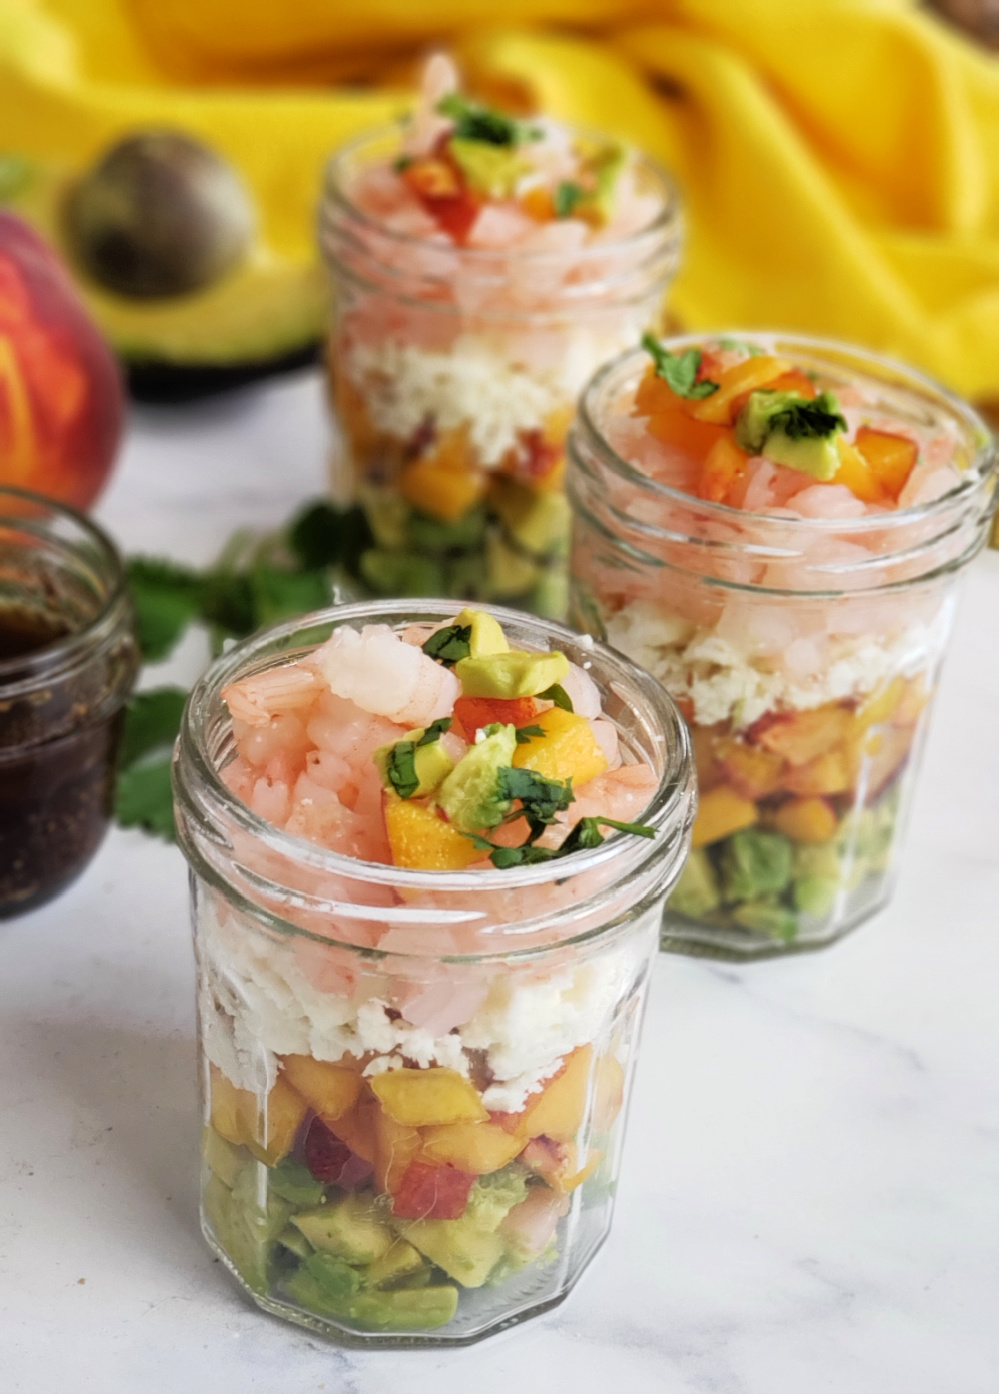 Peach Avocado Shrimp Salad is a refreshing, no-cook lunch or dinner that might remind you of ceviche! Serve in individual jars or ramekins, or stir together gently in a single bowl and serve as an appetizer dip with chips. 